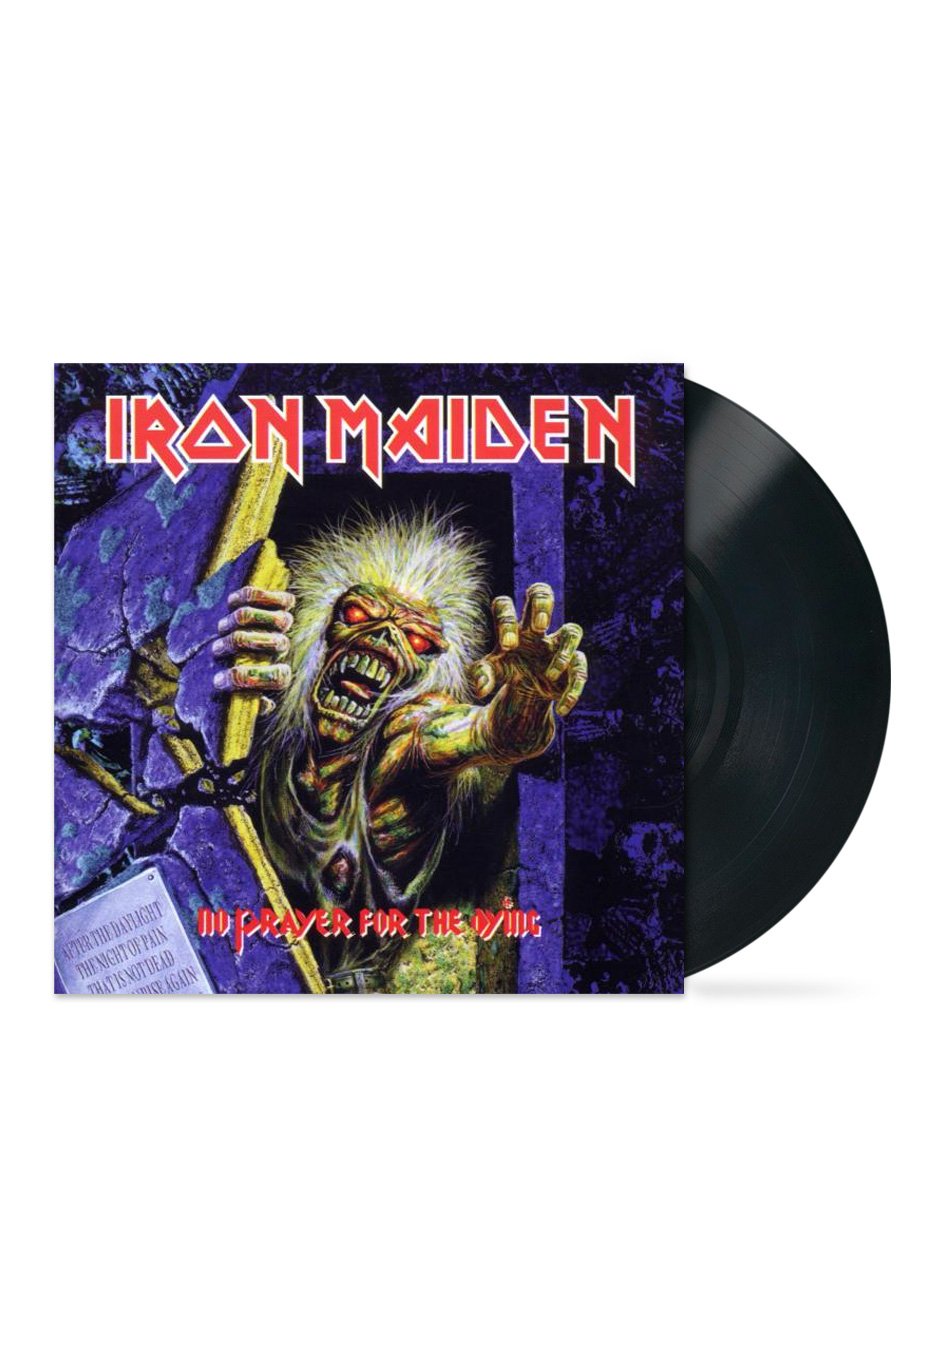 Iron Maiden - No Prayer For The Dying (Remastered) - Vinyl